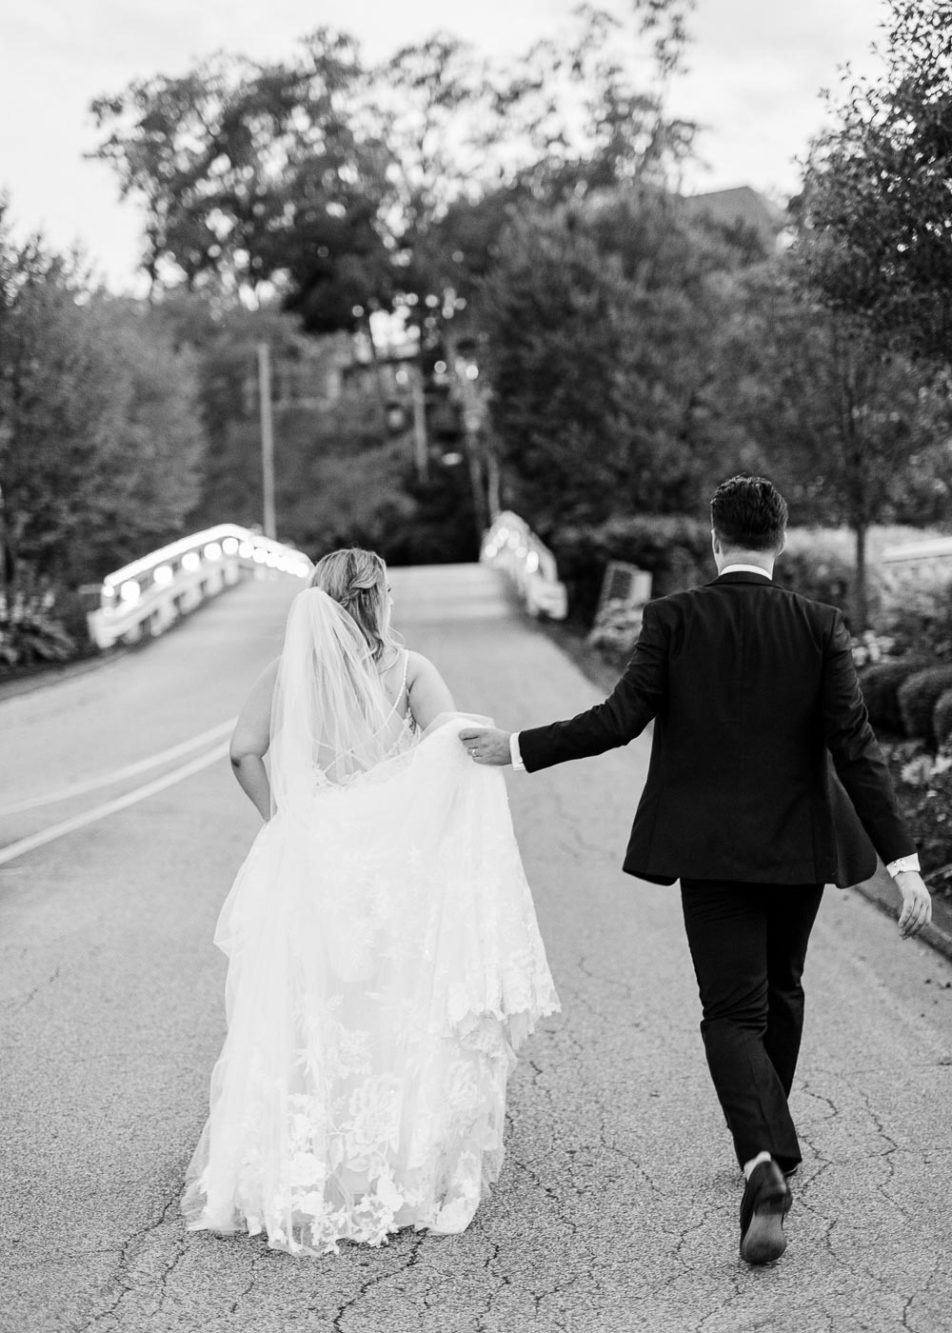 Cleveland Yacht Club wedding photographed by Juliana Kaderbek Photography, cleveland wedding photographer